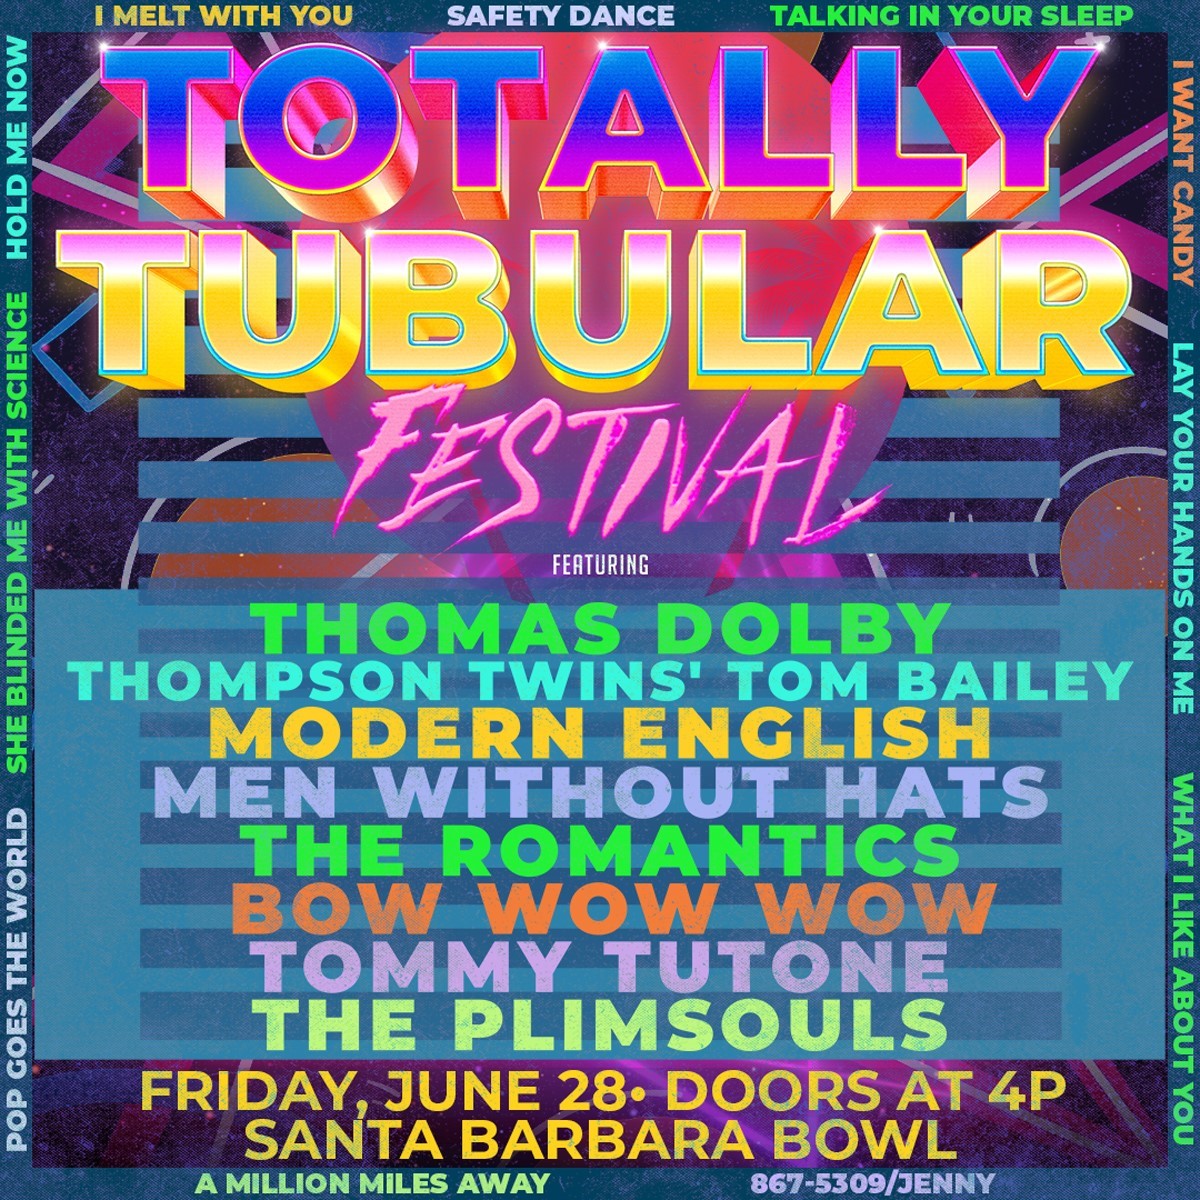 Totally Tubular Contest Rules